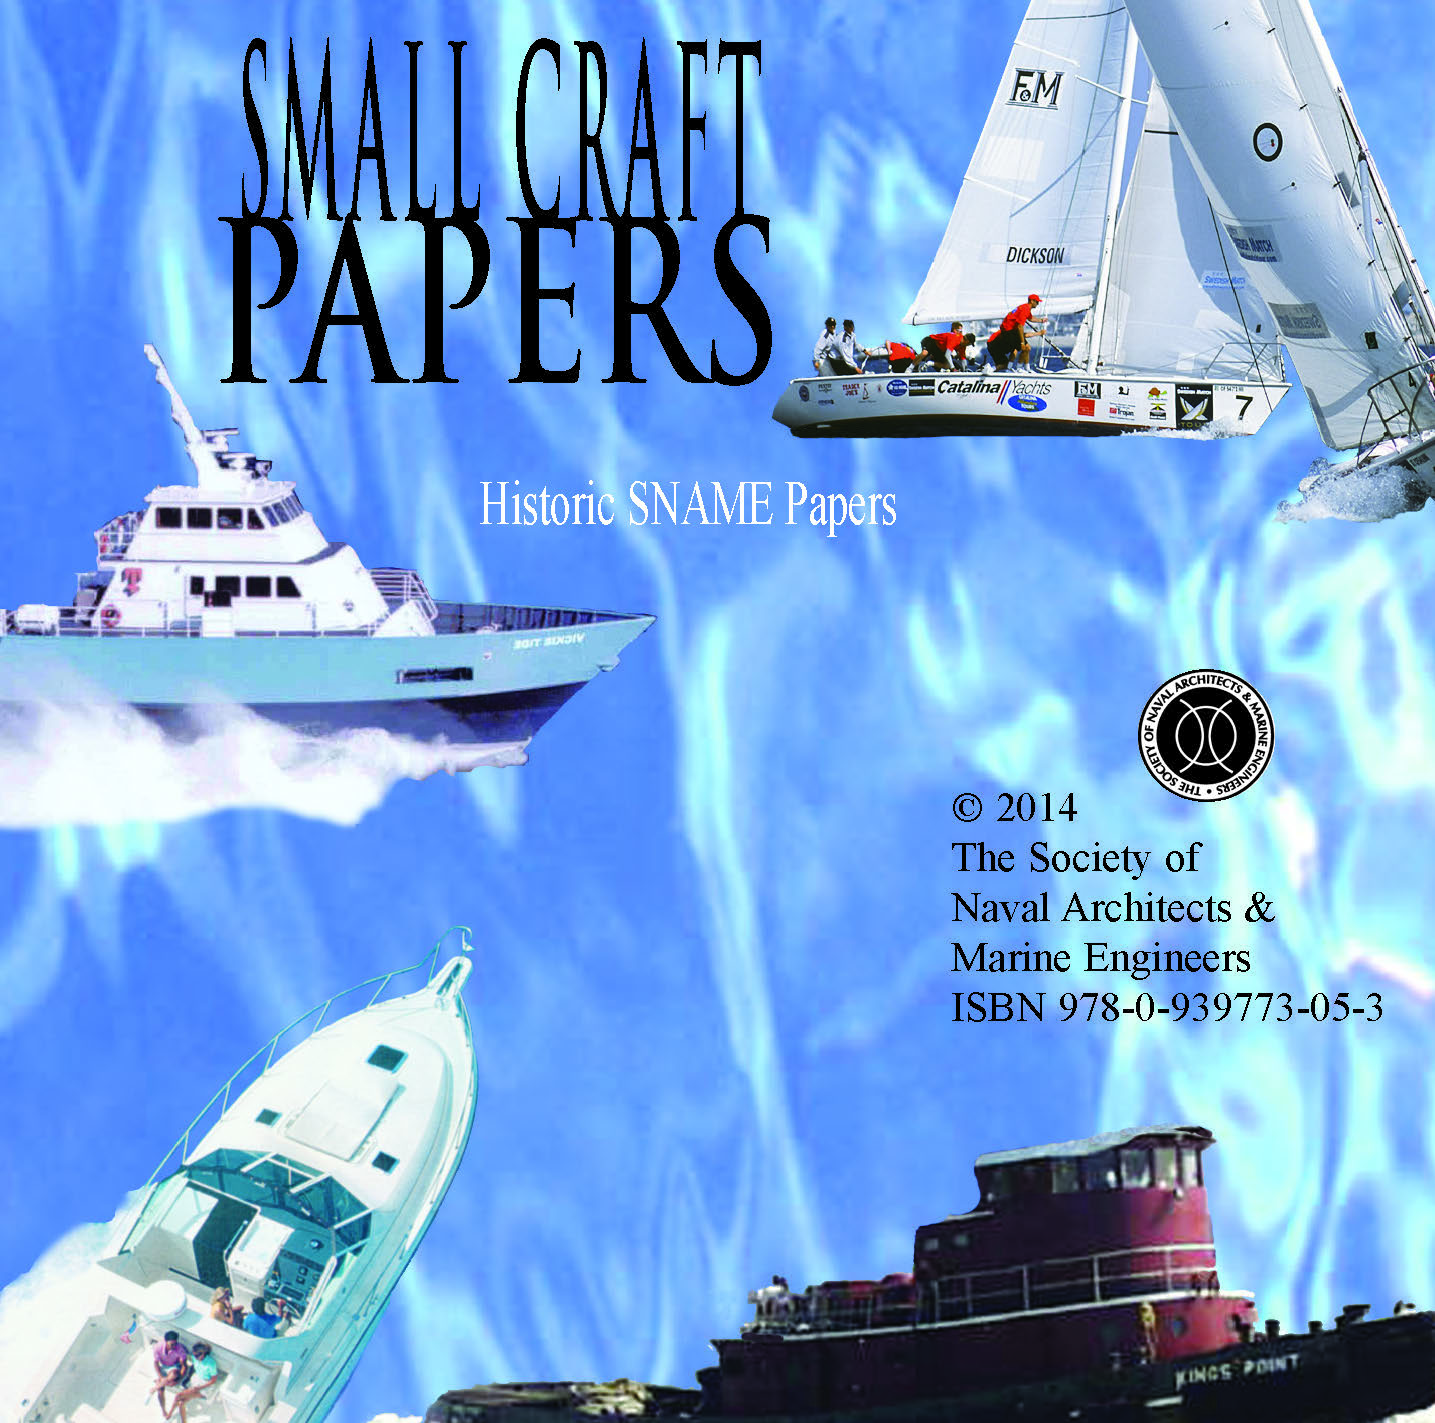 Small Craft Papers: SNAME Papers 2002- 2014